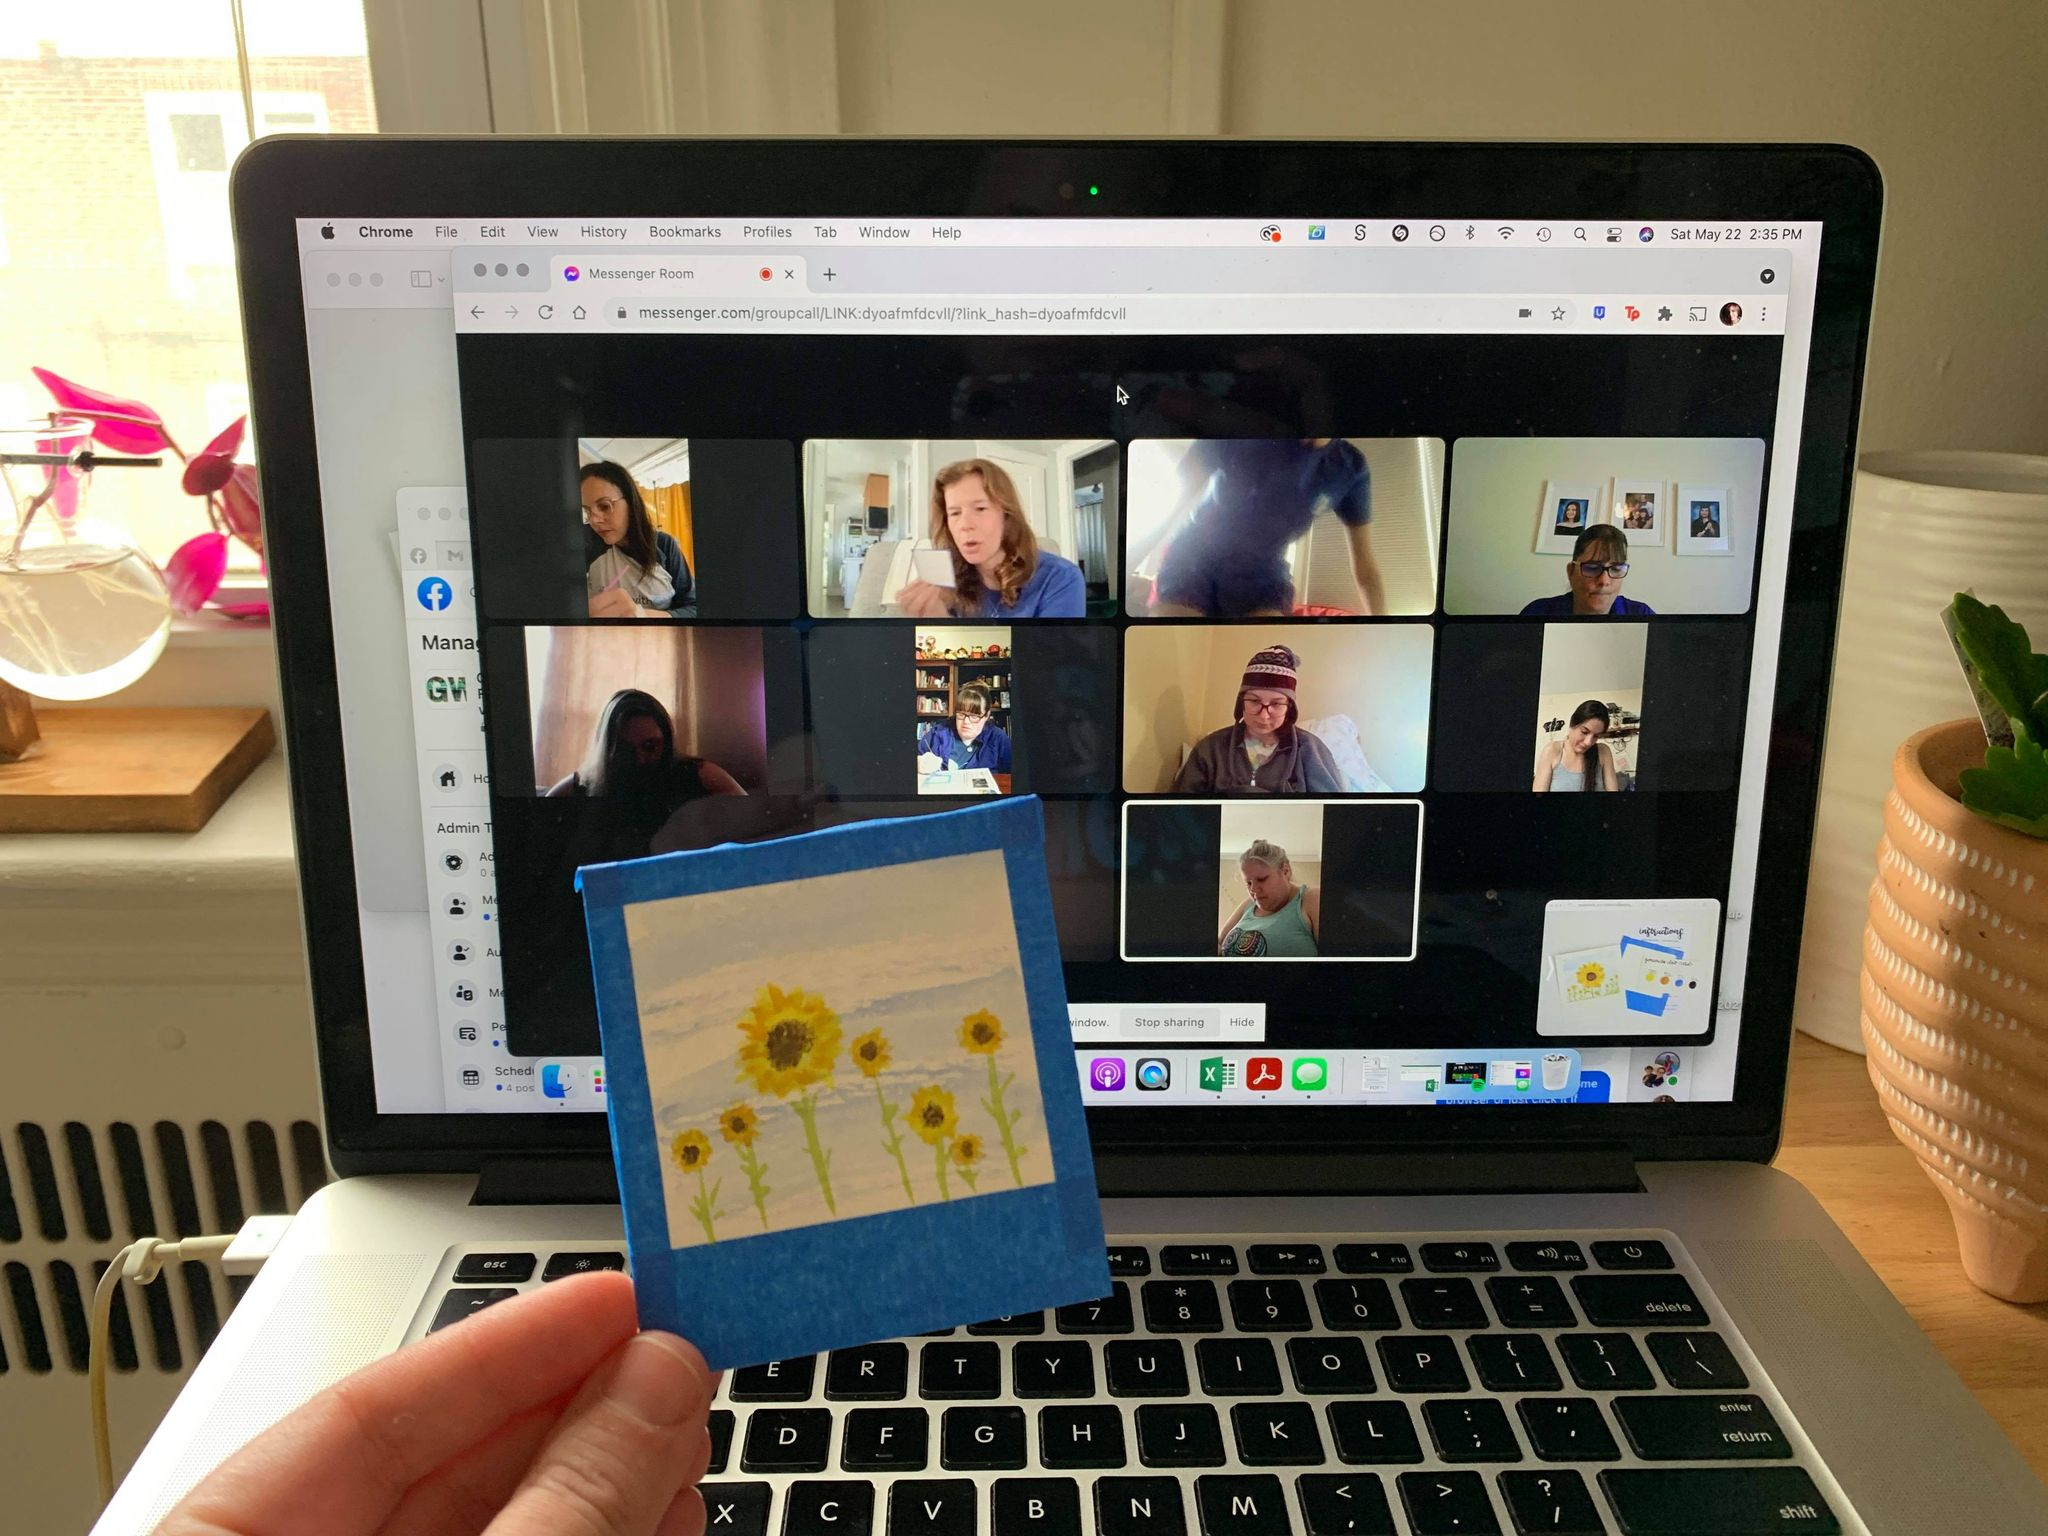 An image of painted sunflowers being held up to the computer screen as summit participants work on their crafts in the image background.